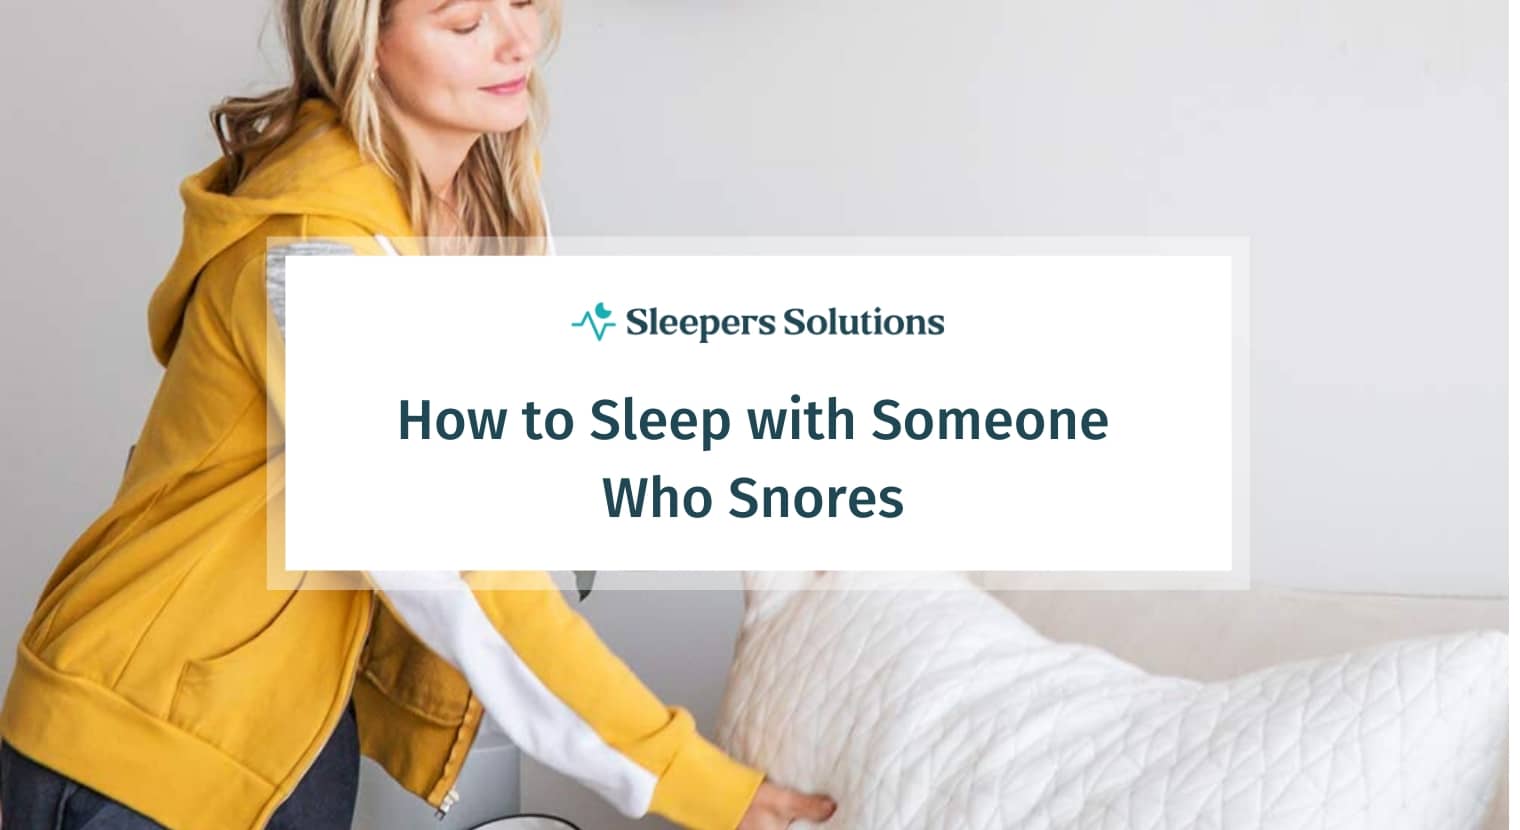 How to Sleep with Someone Who Snores